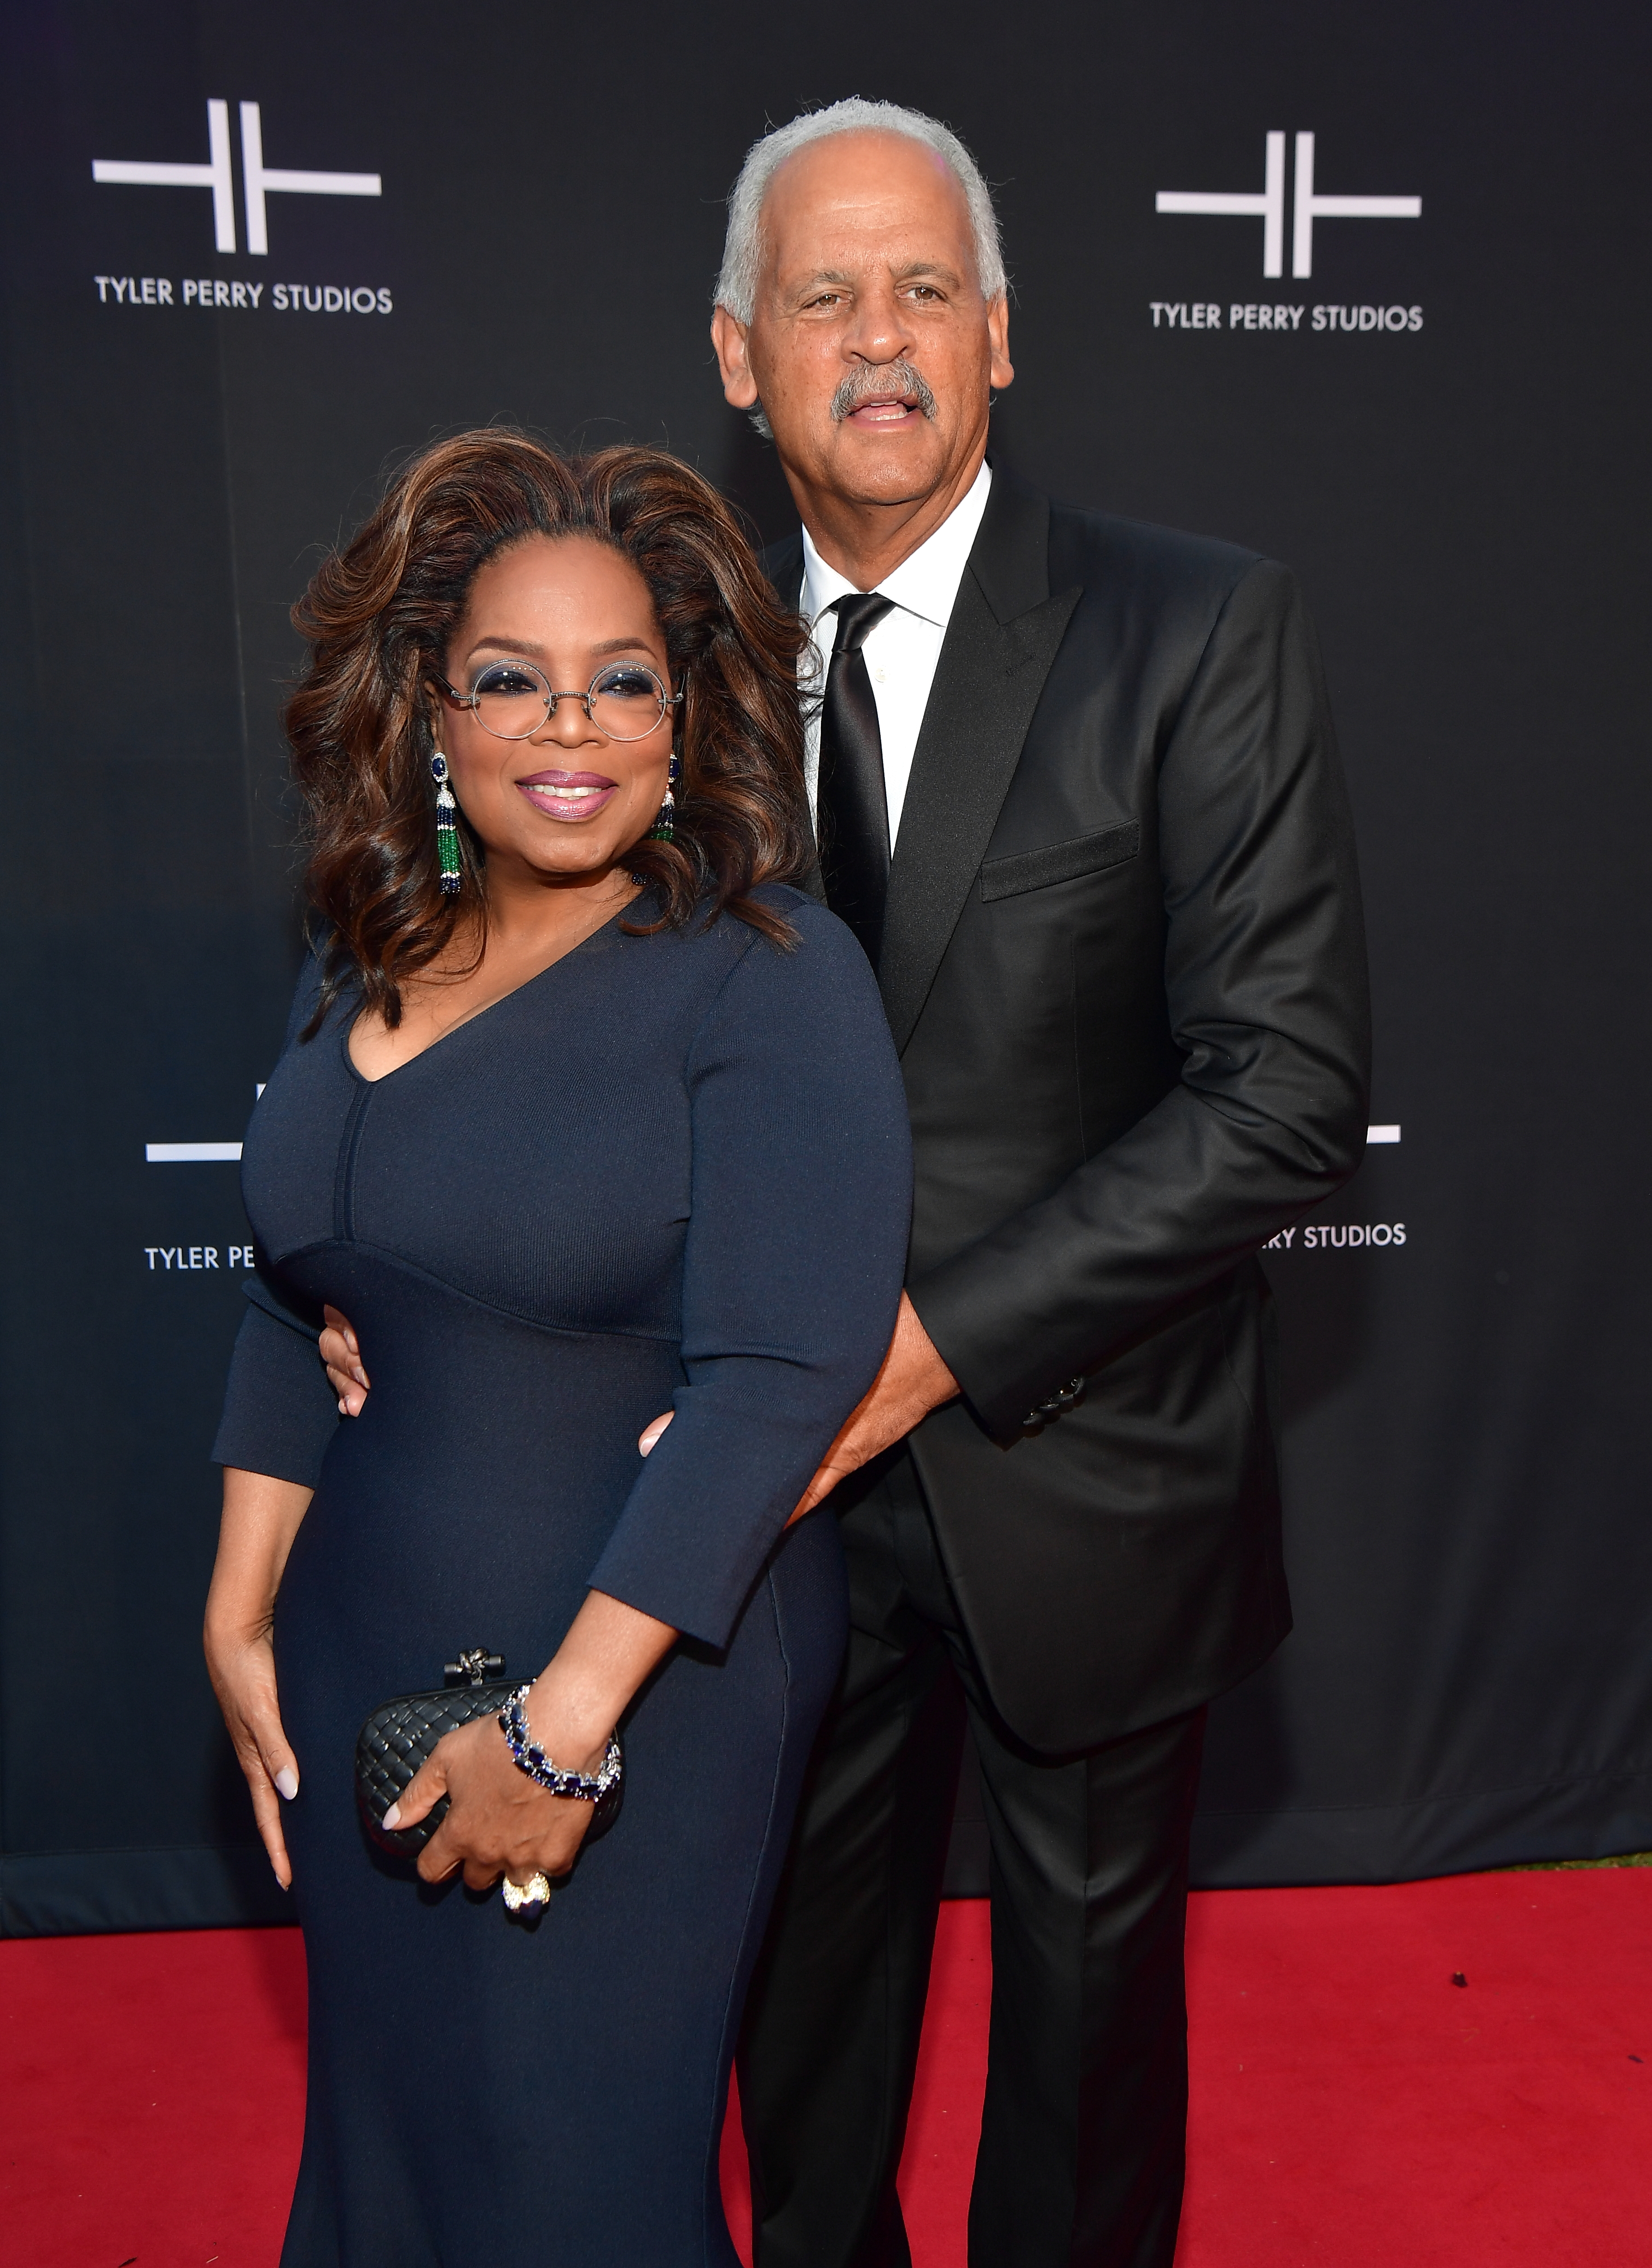 Oprah Winfrey and Stedman Graham attend Tyler Perry Studios Grand Opening Gala - Arrivals at Tyler Perry Studios in Atlanta, Georgia on October 5, 2019. | Source: Getty Images